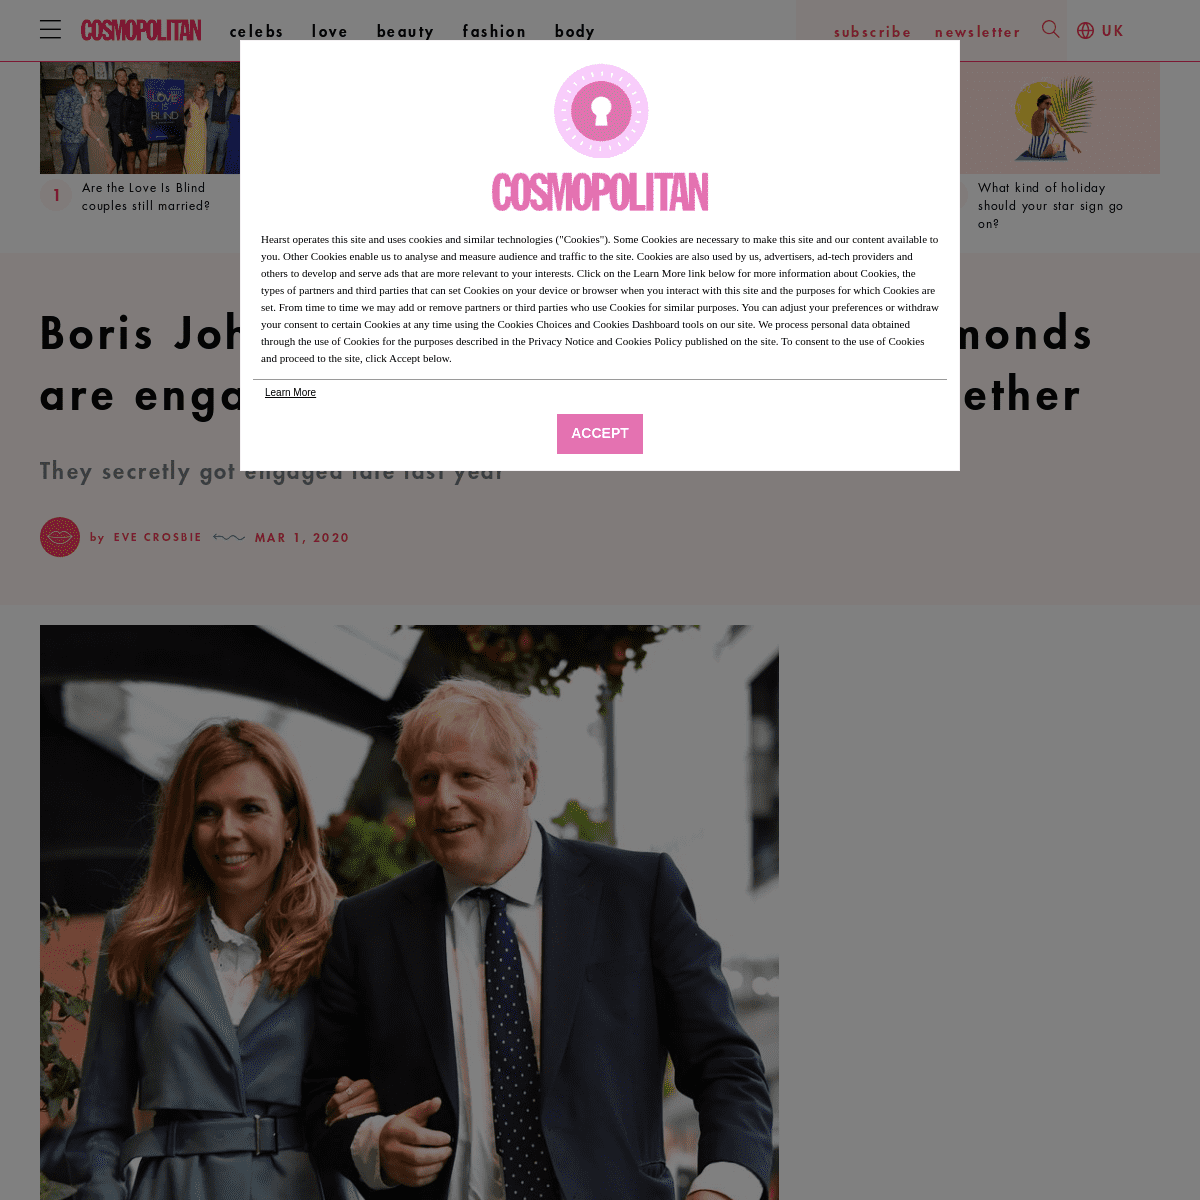 A complete backup of www.cosmopolitan.com/uk/reports/a31176266/boris-johnson-carrie-symonds-engaged-baby-announcement/